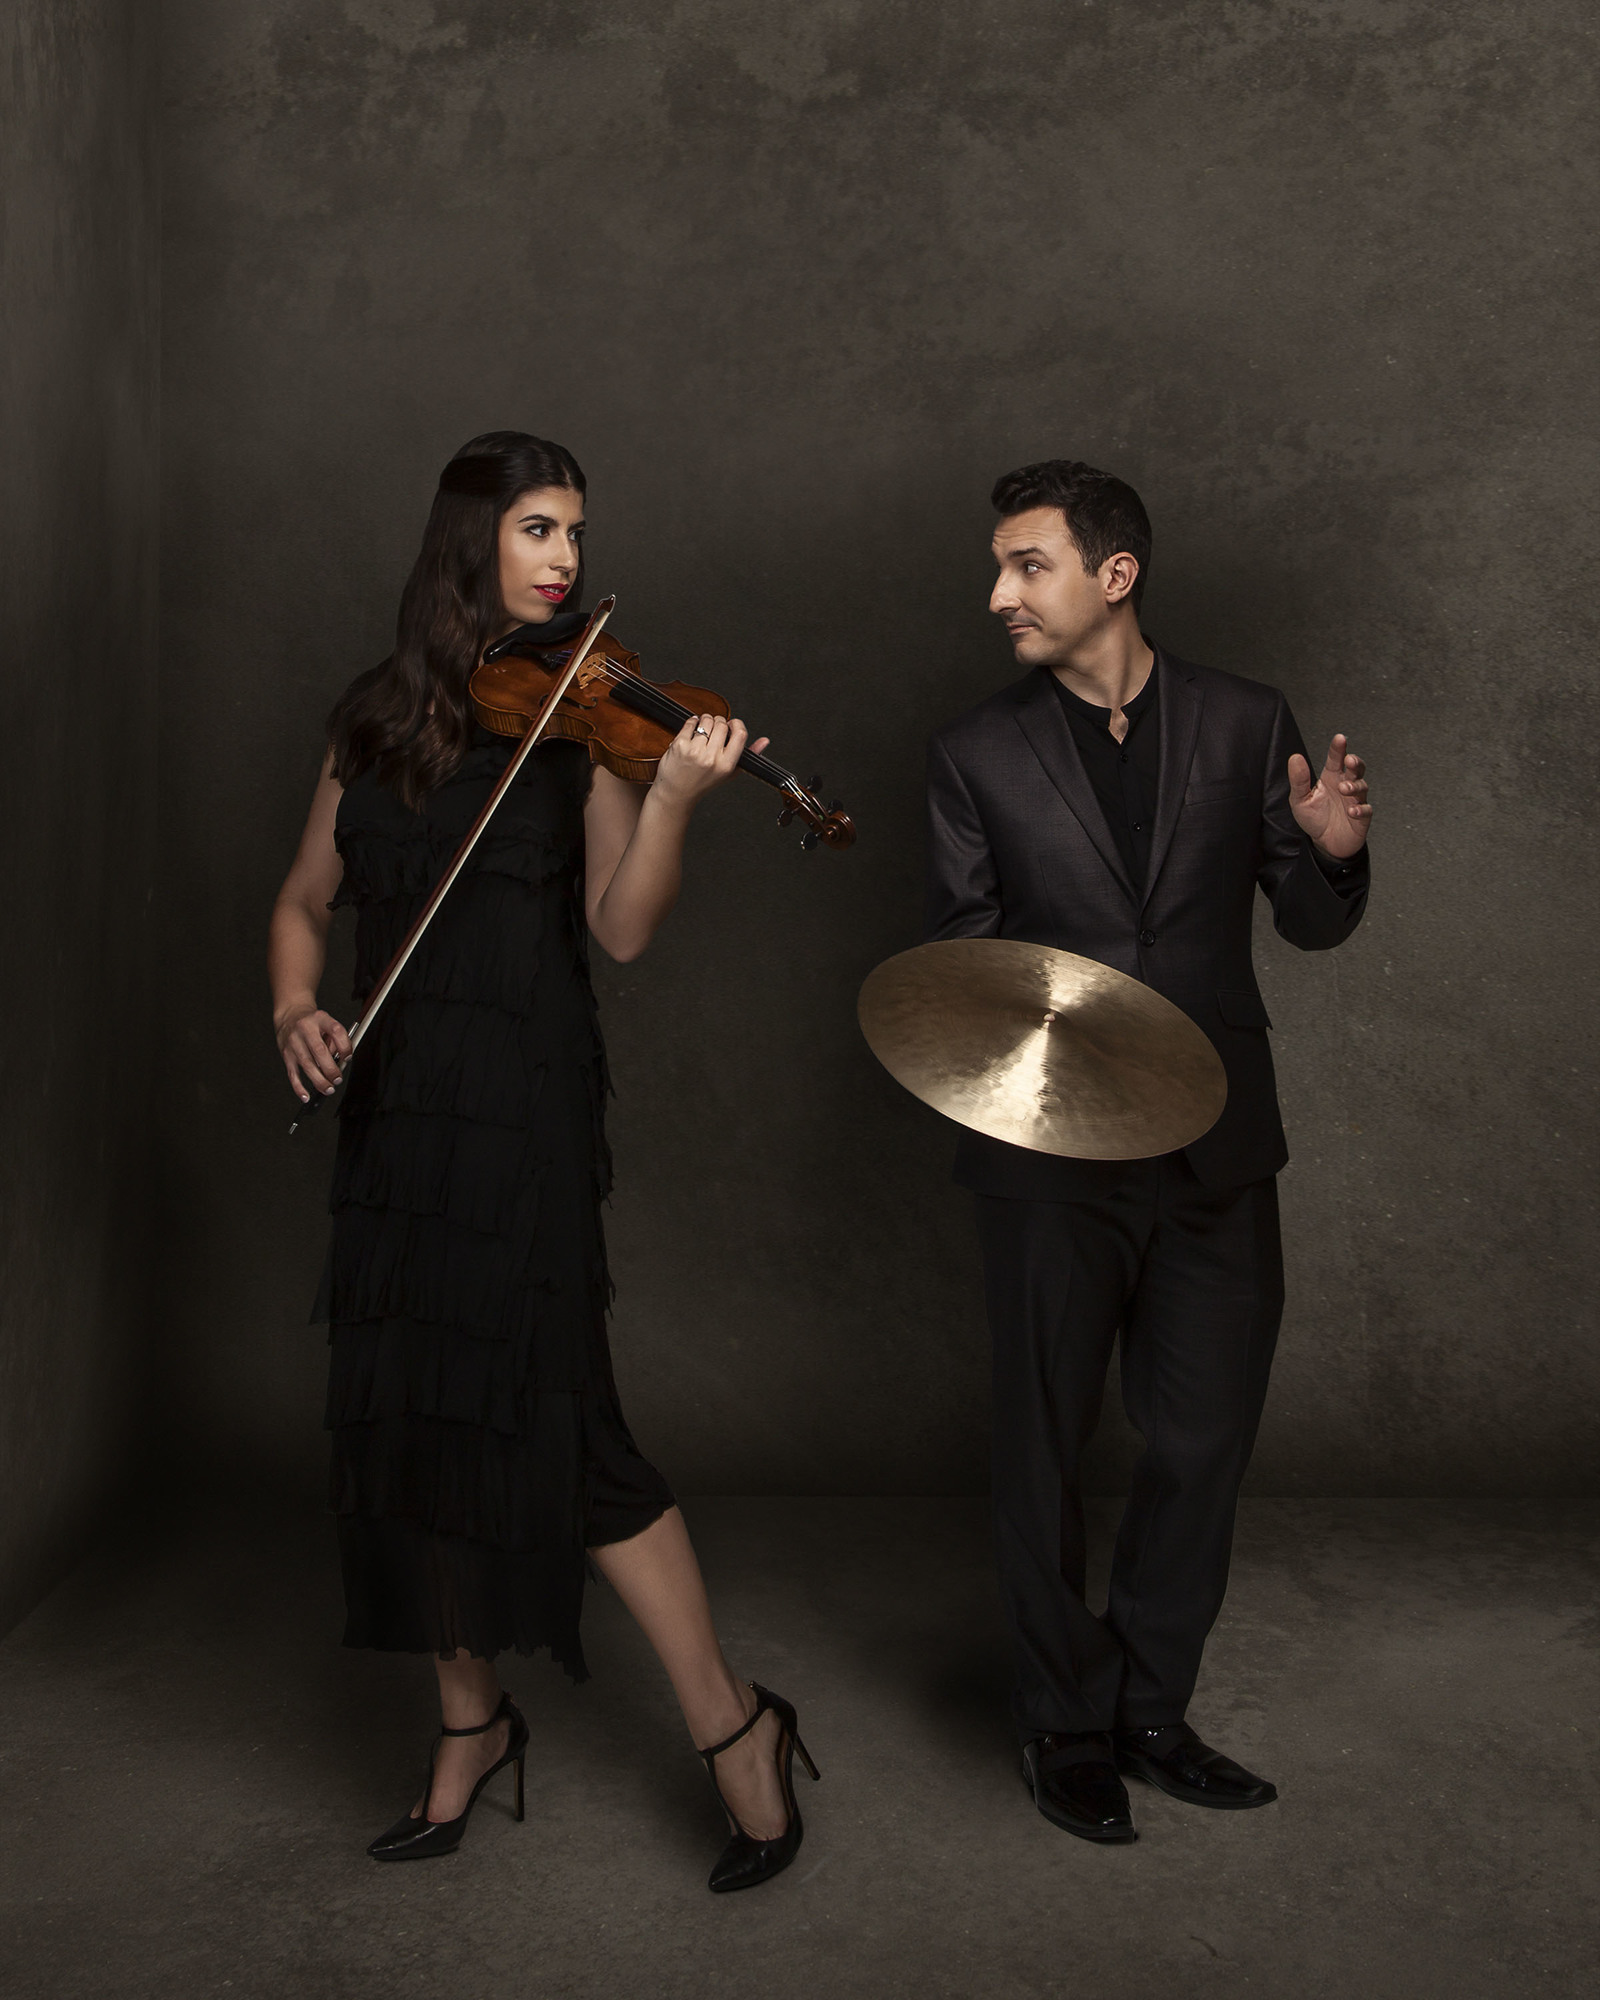 Contemporary music organization ensemblenewSRQ is run by married duo Samantha Bennett and George Nickson of the Sarasota Orchestra. Courtesy photo